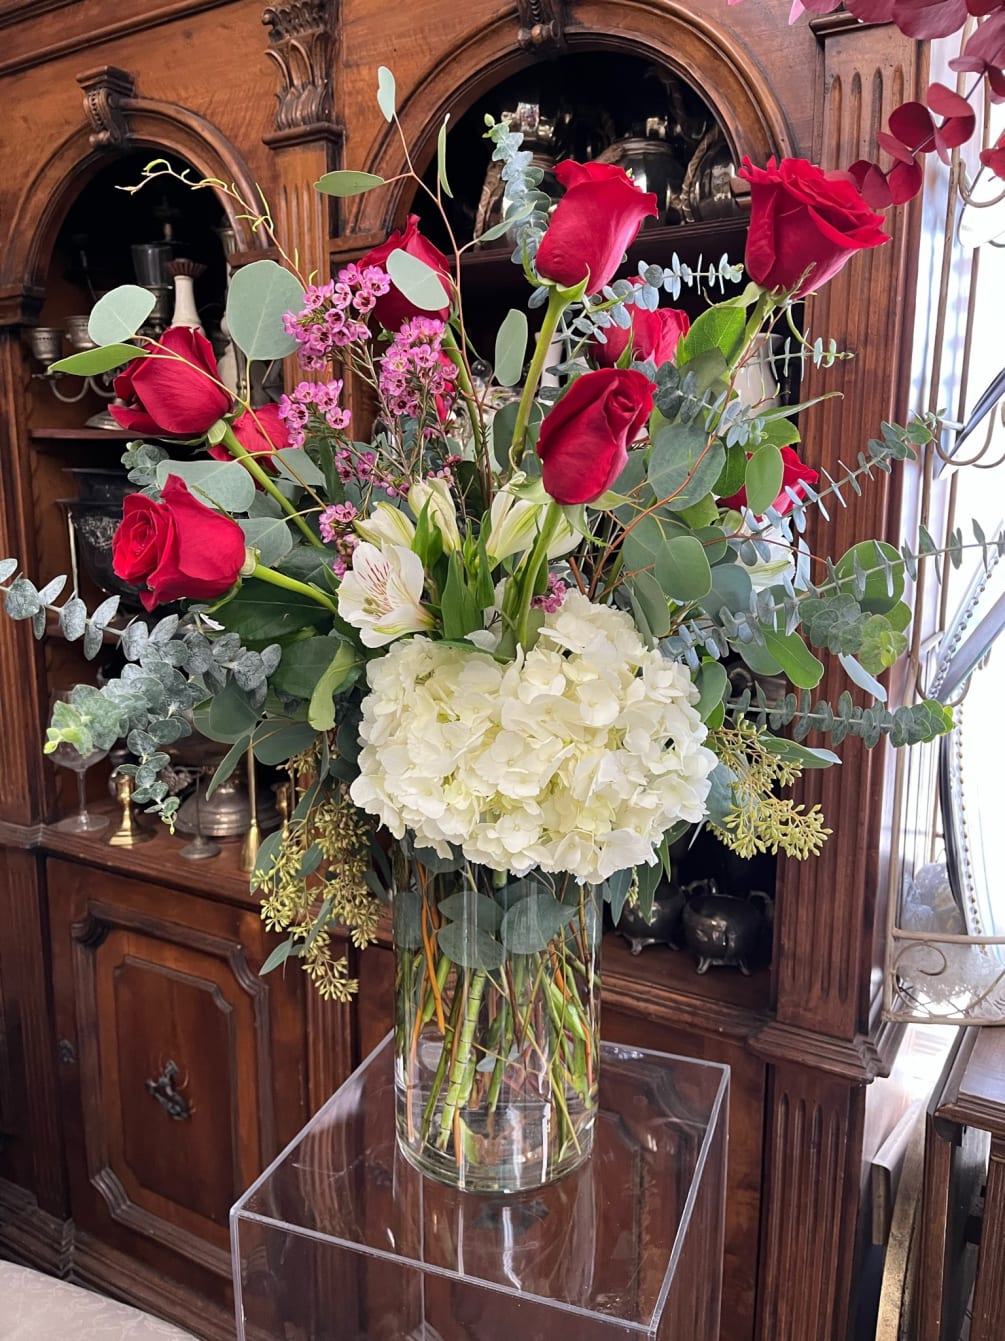 Stunning Rose arrangement featuring roses in any colored desired (hot pink shown